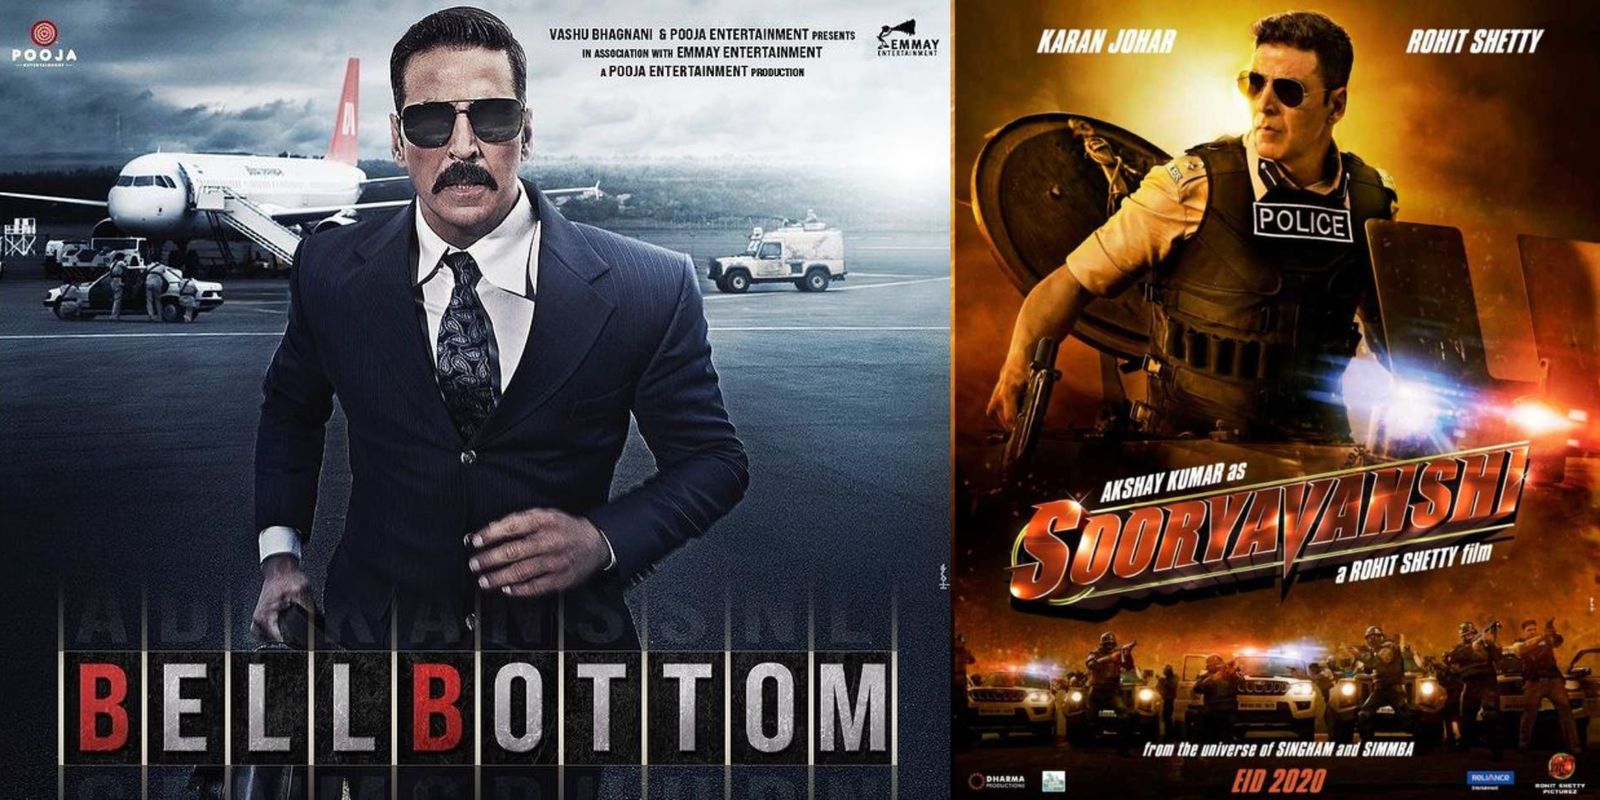 Release Of Akshay Kumar's Bell Bottom Pushed To June From April Because Of Sooryavanshi? Here's What We Know